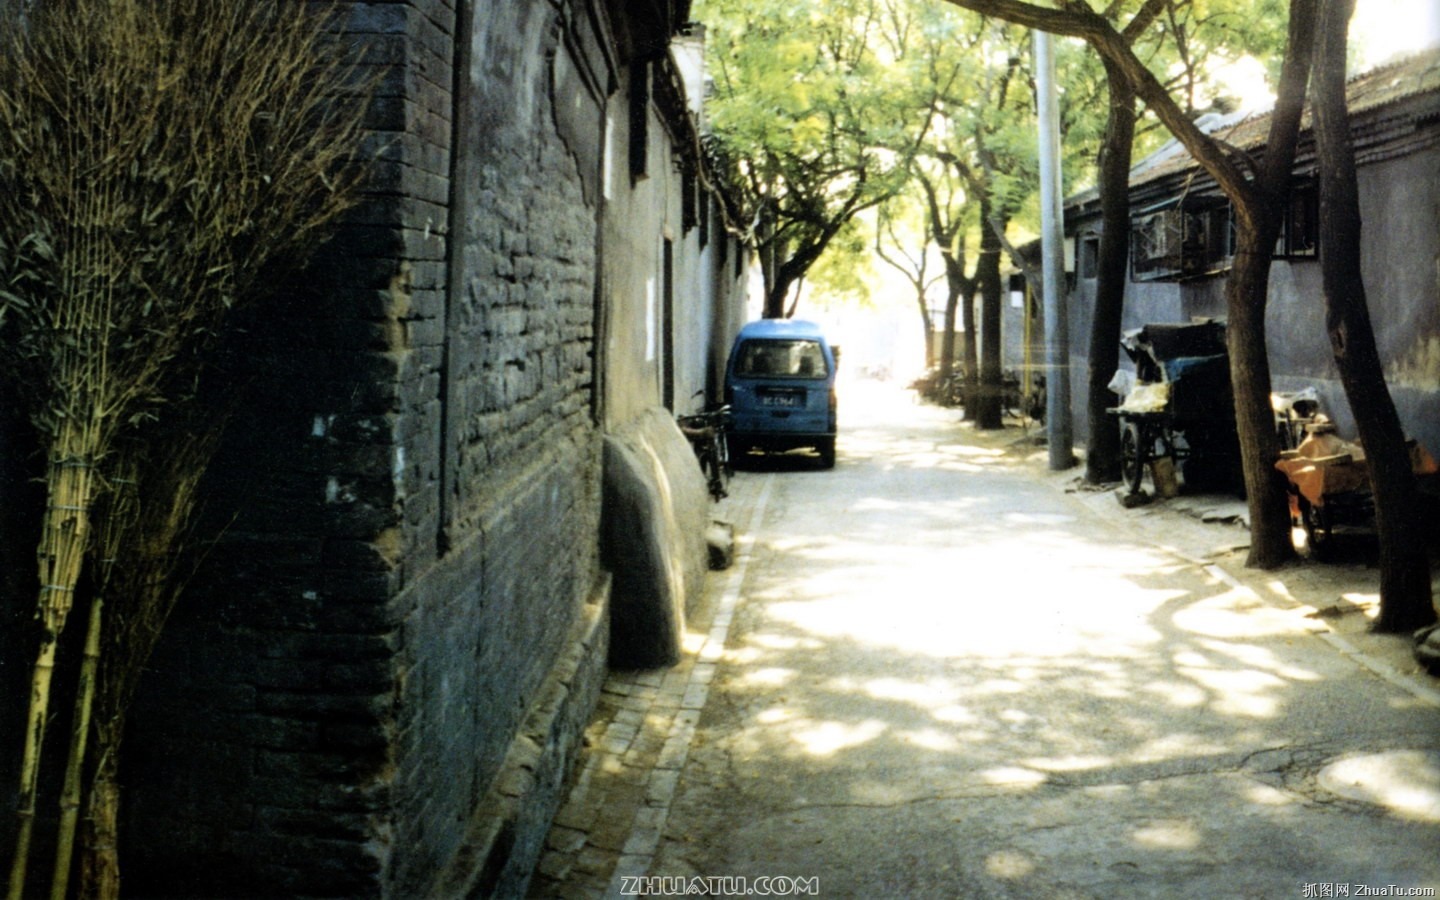 Old Hutong life for old photos wallpaper #40 - 1440x900